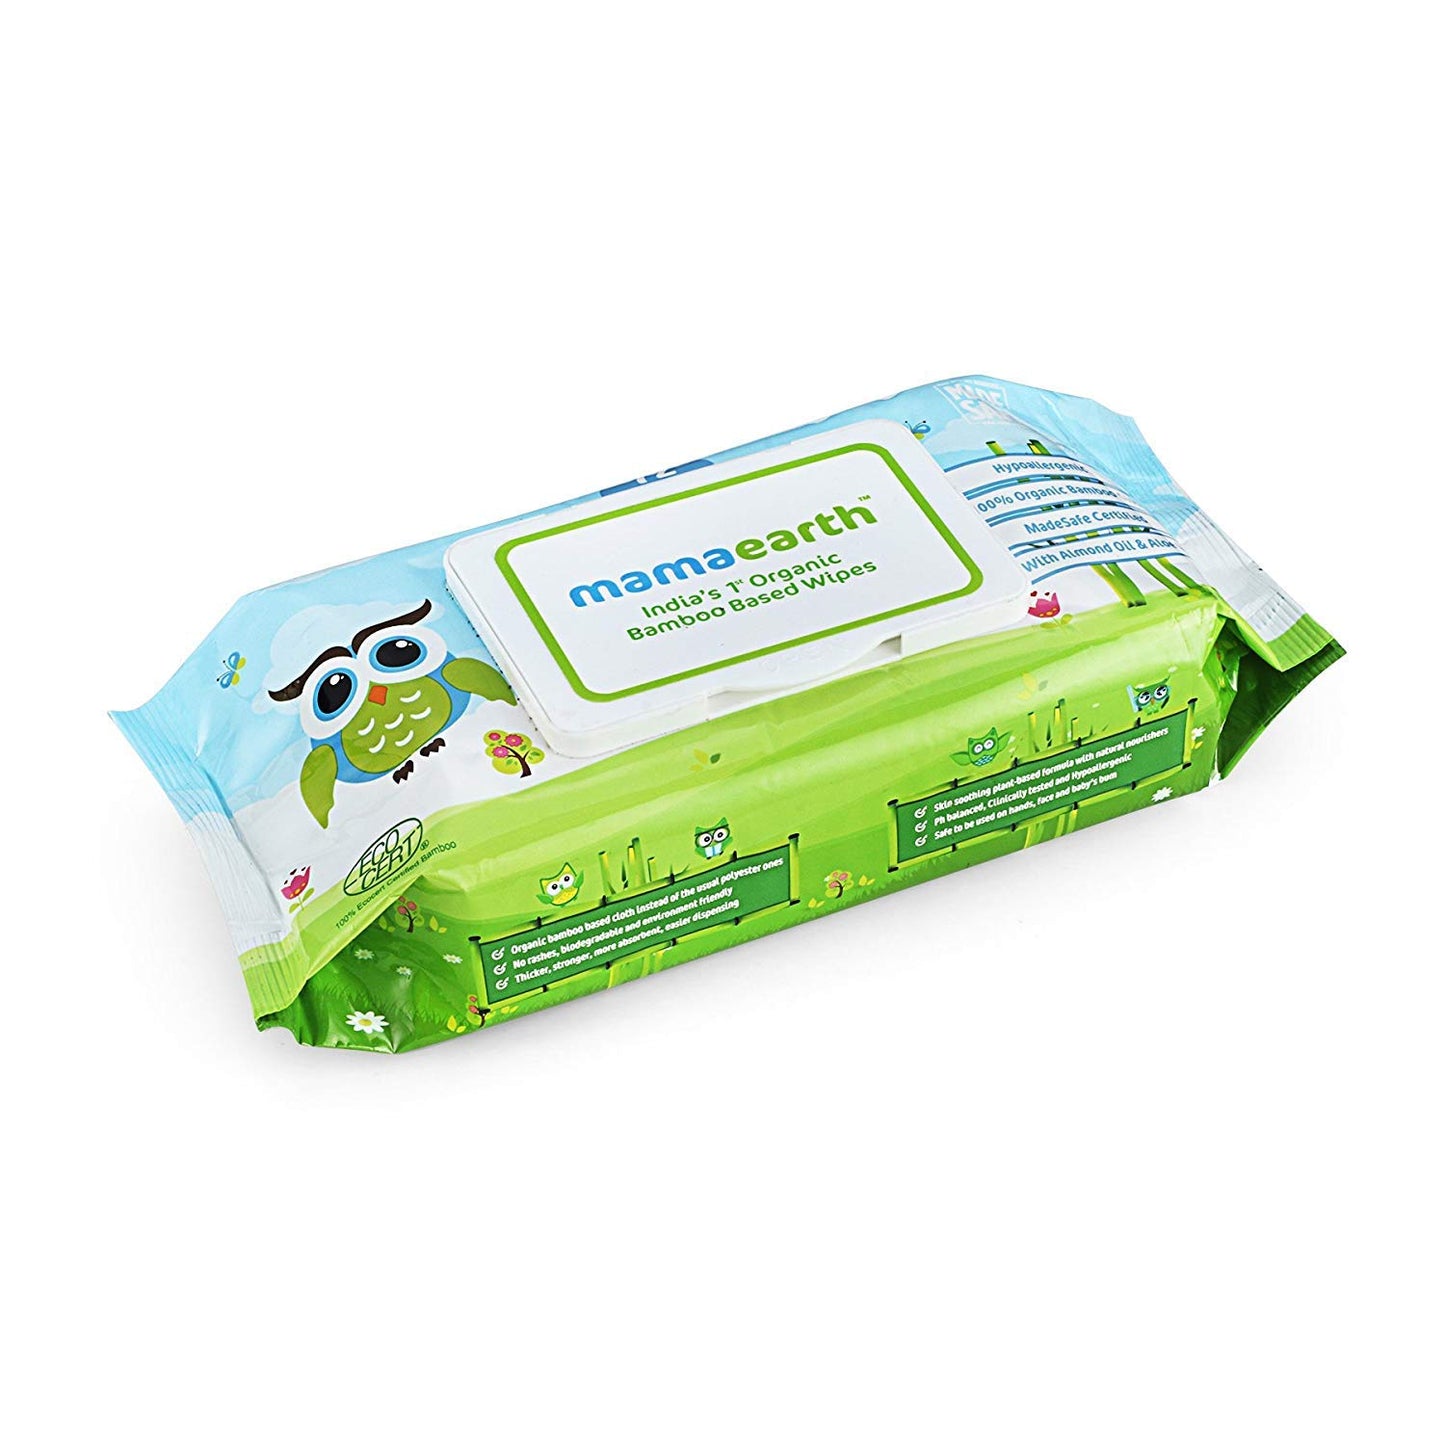 Mamaearth Organic Bamboo Based Baby Wet Wipes - Pack of 1 (1x72)